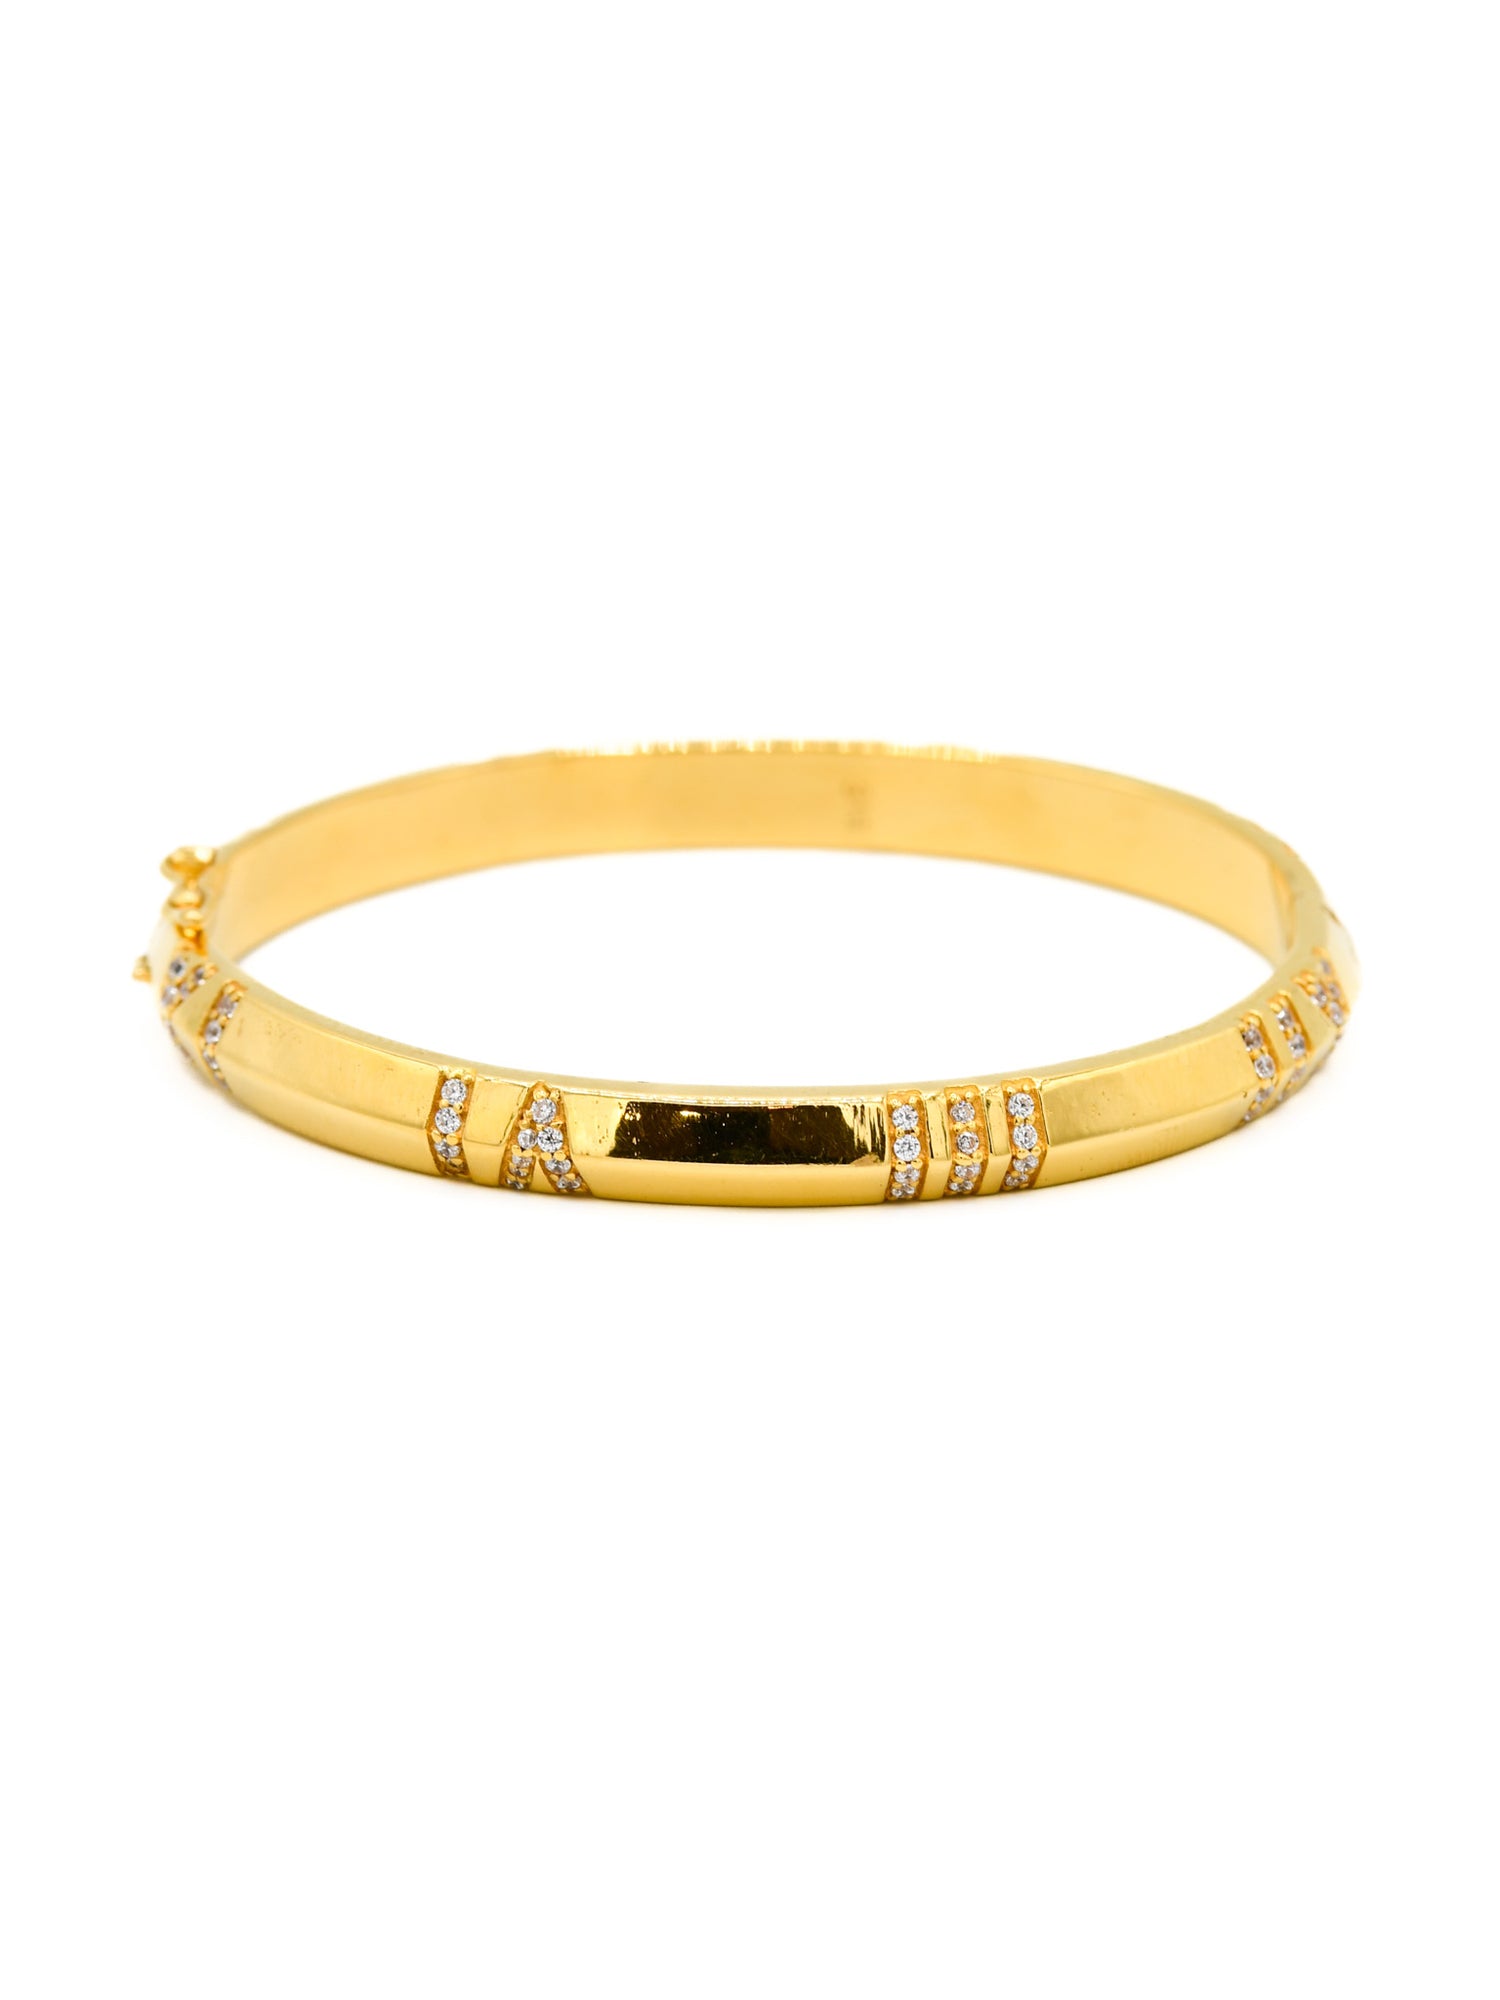 22ct Gold CZ Oval Shaped Bangle - Roop Darshan